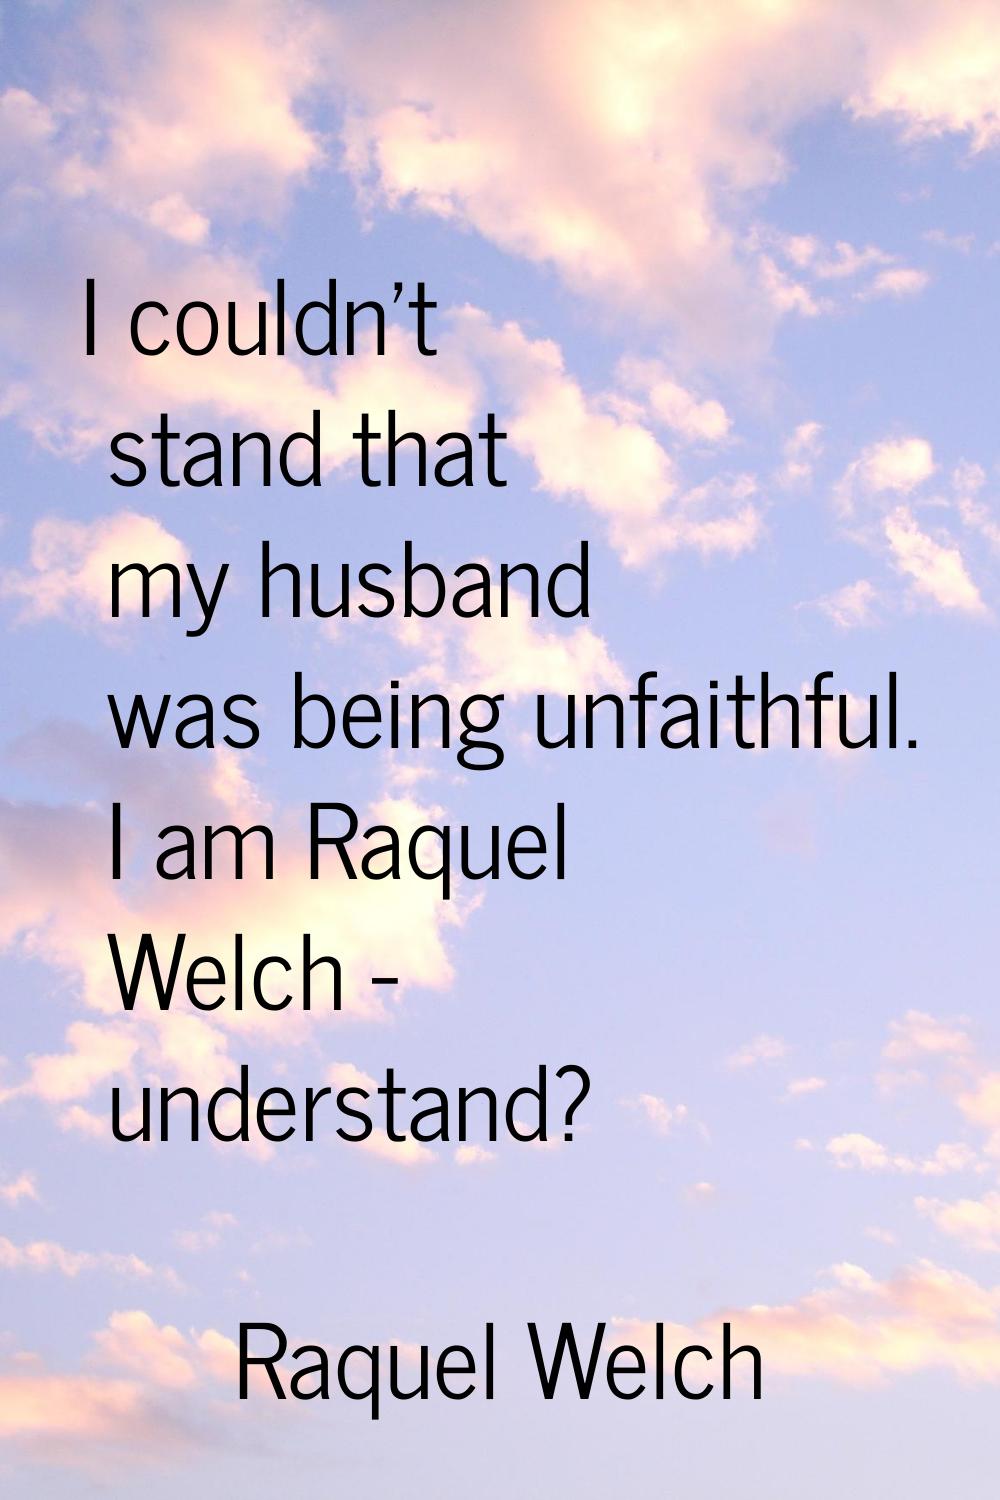 I couldn't stand that my husband was being unfaithful. I am Raquel Welch - understand?